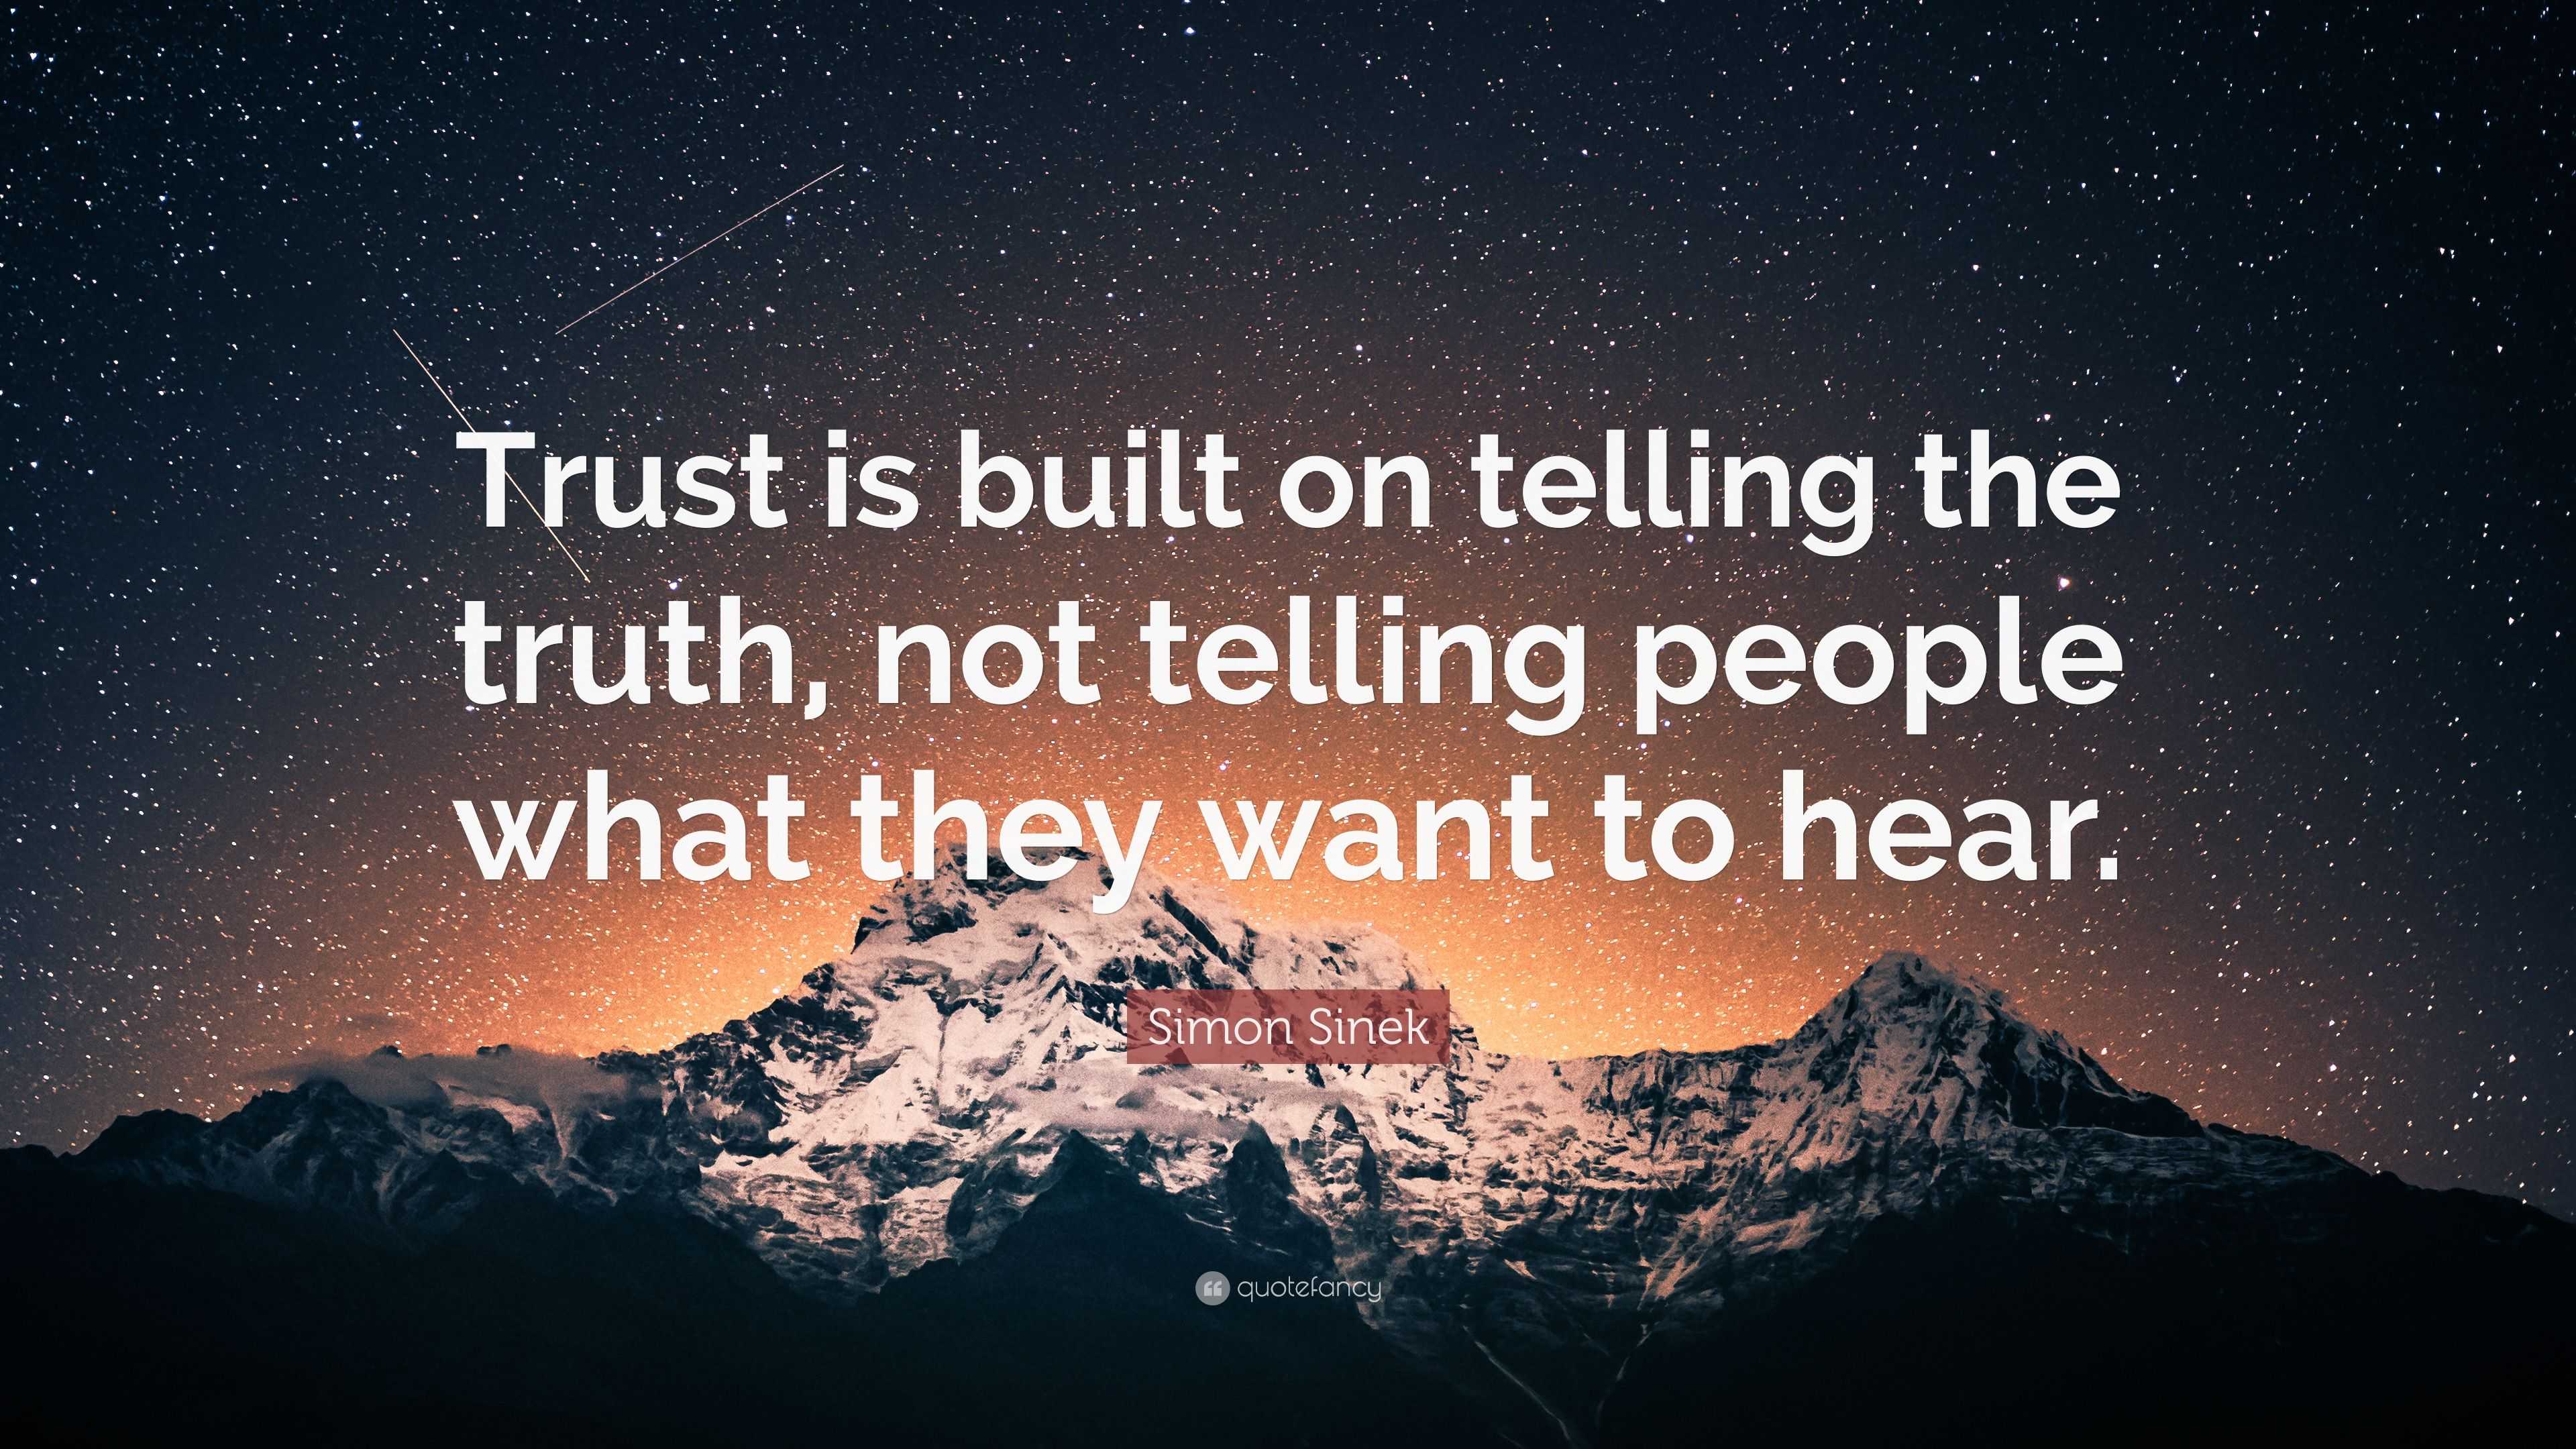 Simon Sinek Quote “trust Is Built On Telling The Truth Not Telling People What They Want To Hear”